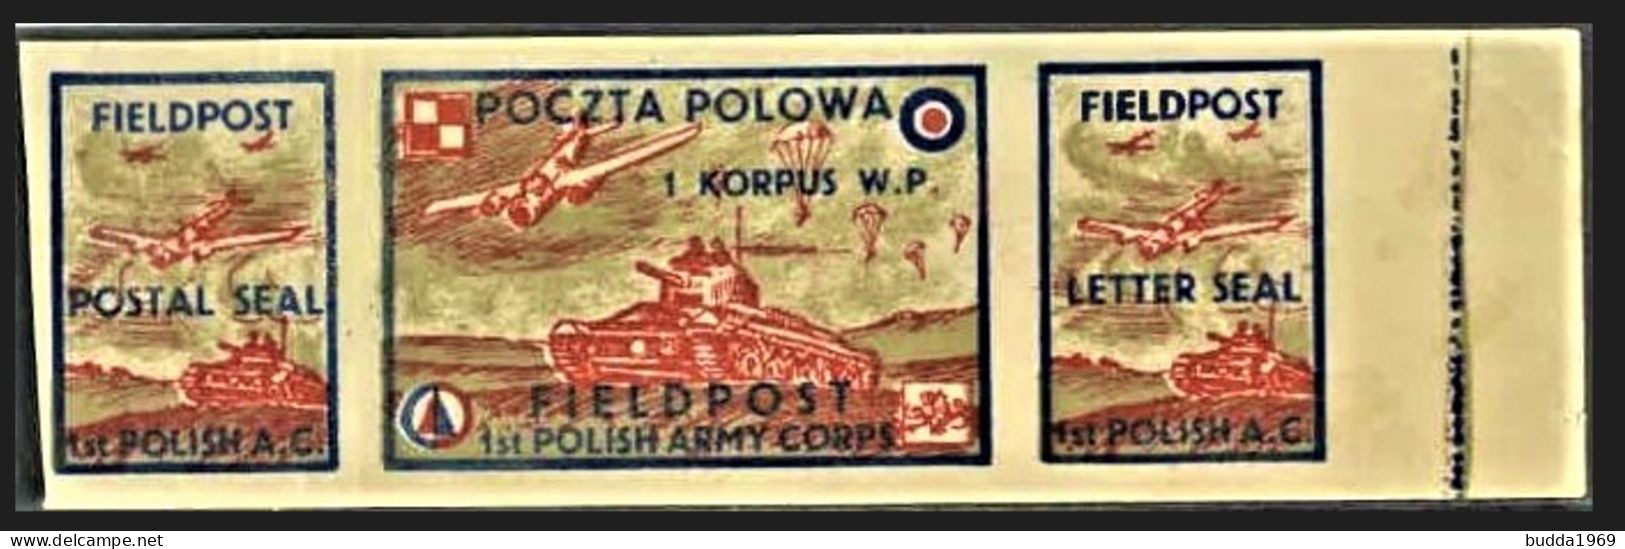 POLAND 1942- FIRST POLISH CORPS IN ENGLAND - FIELDPOST LABEL MNH**! - Government In Exile In London